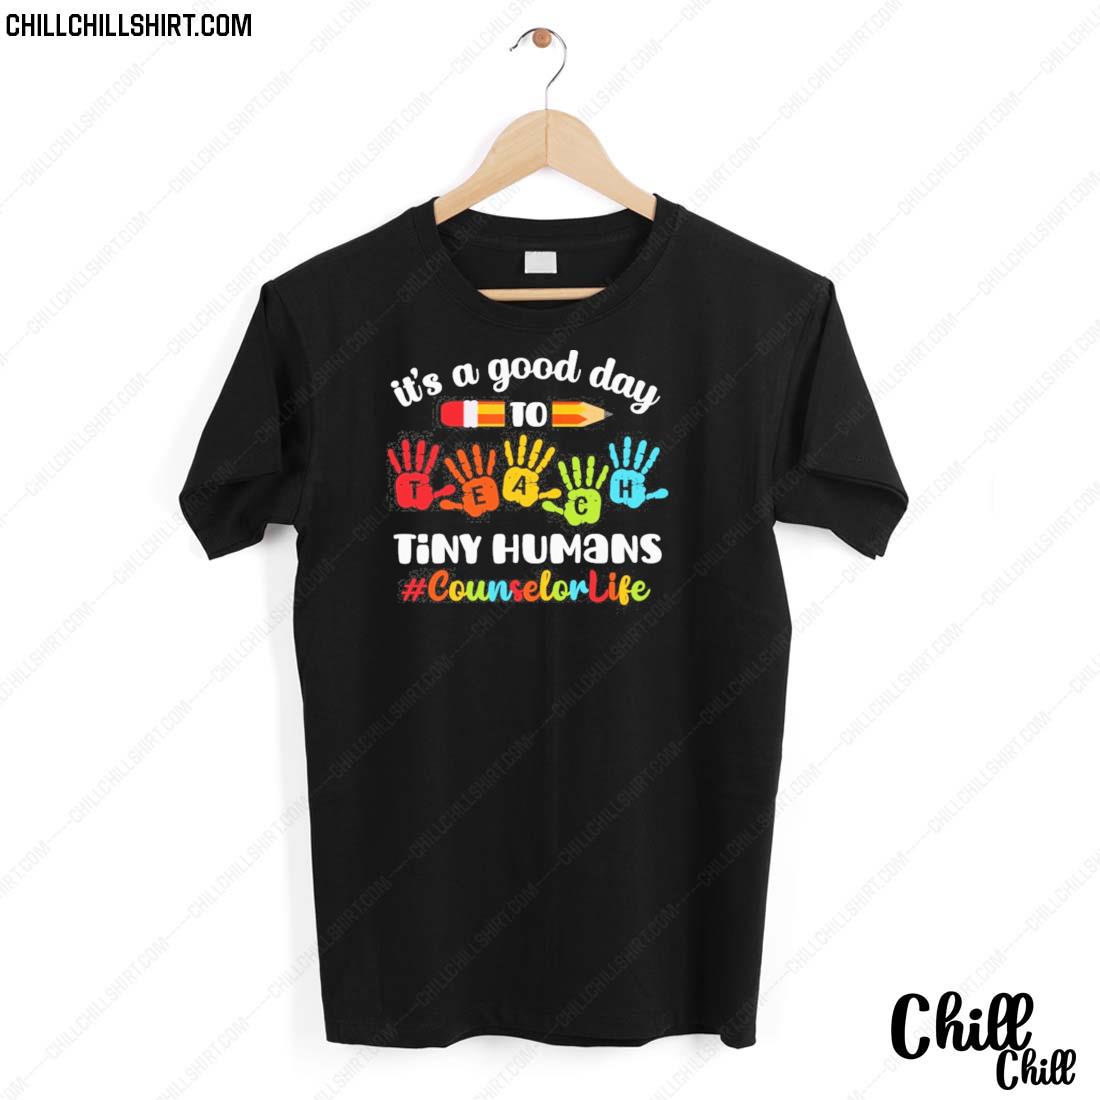 Nice it's A Good Day To Teach Tiny Humans Counselor Life Shirt